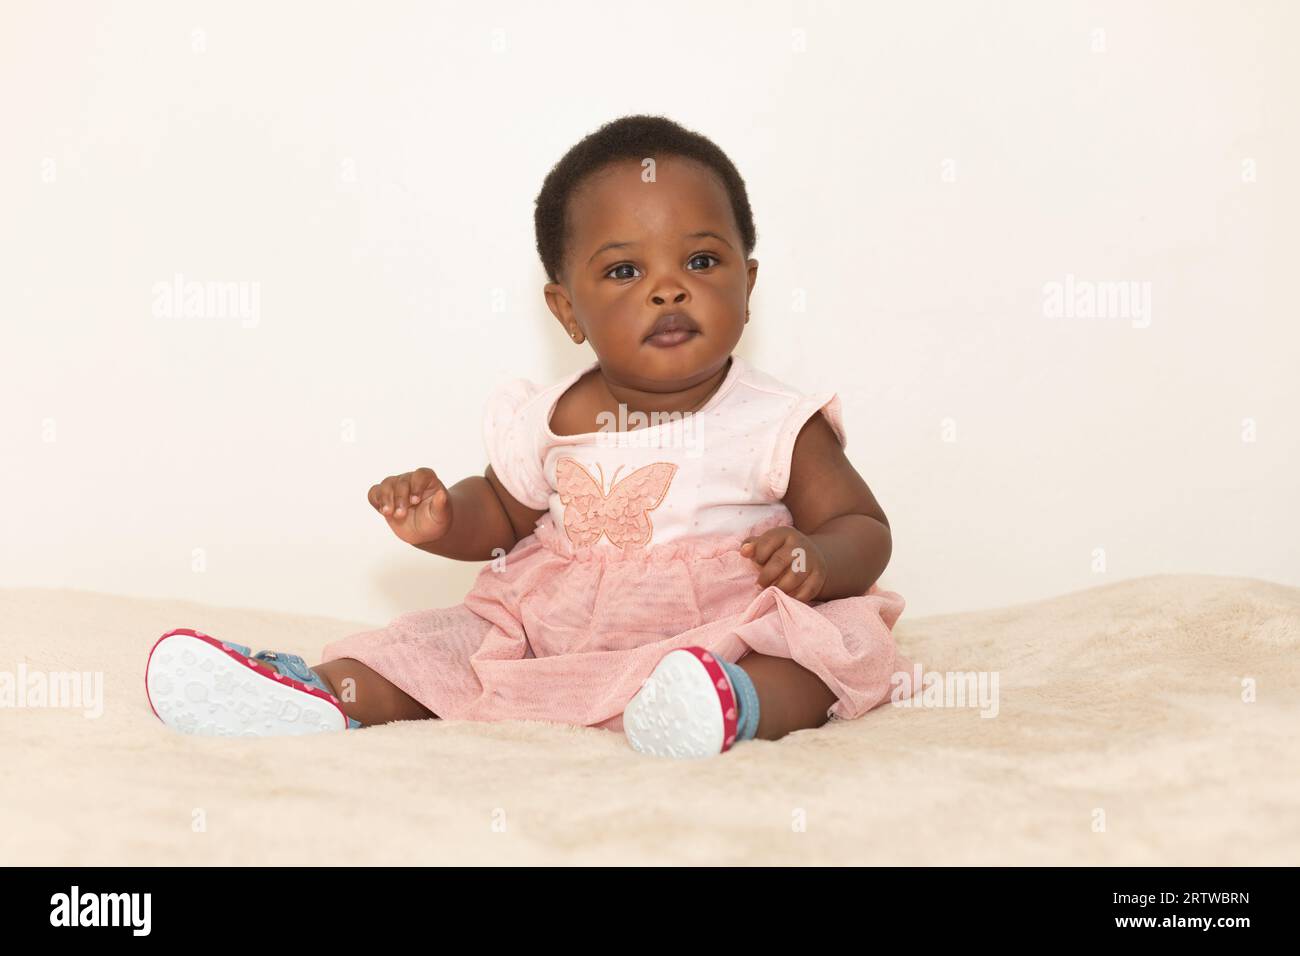 Portrait of a black baby girl dressed in a pink dress sitting on a bed Stock Photo